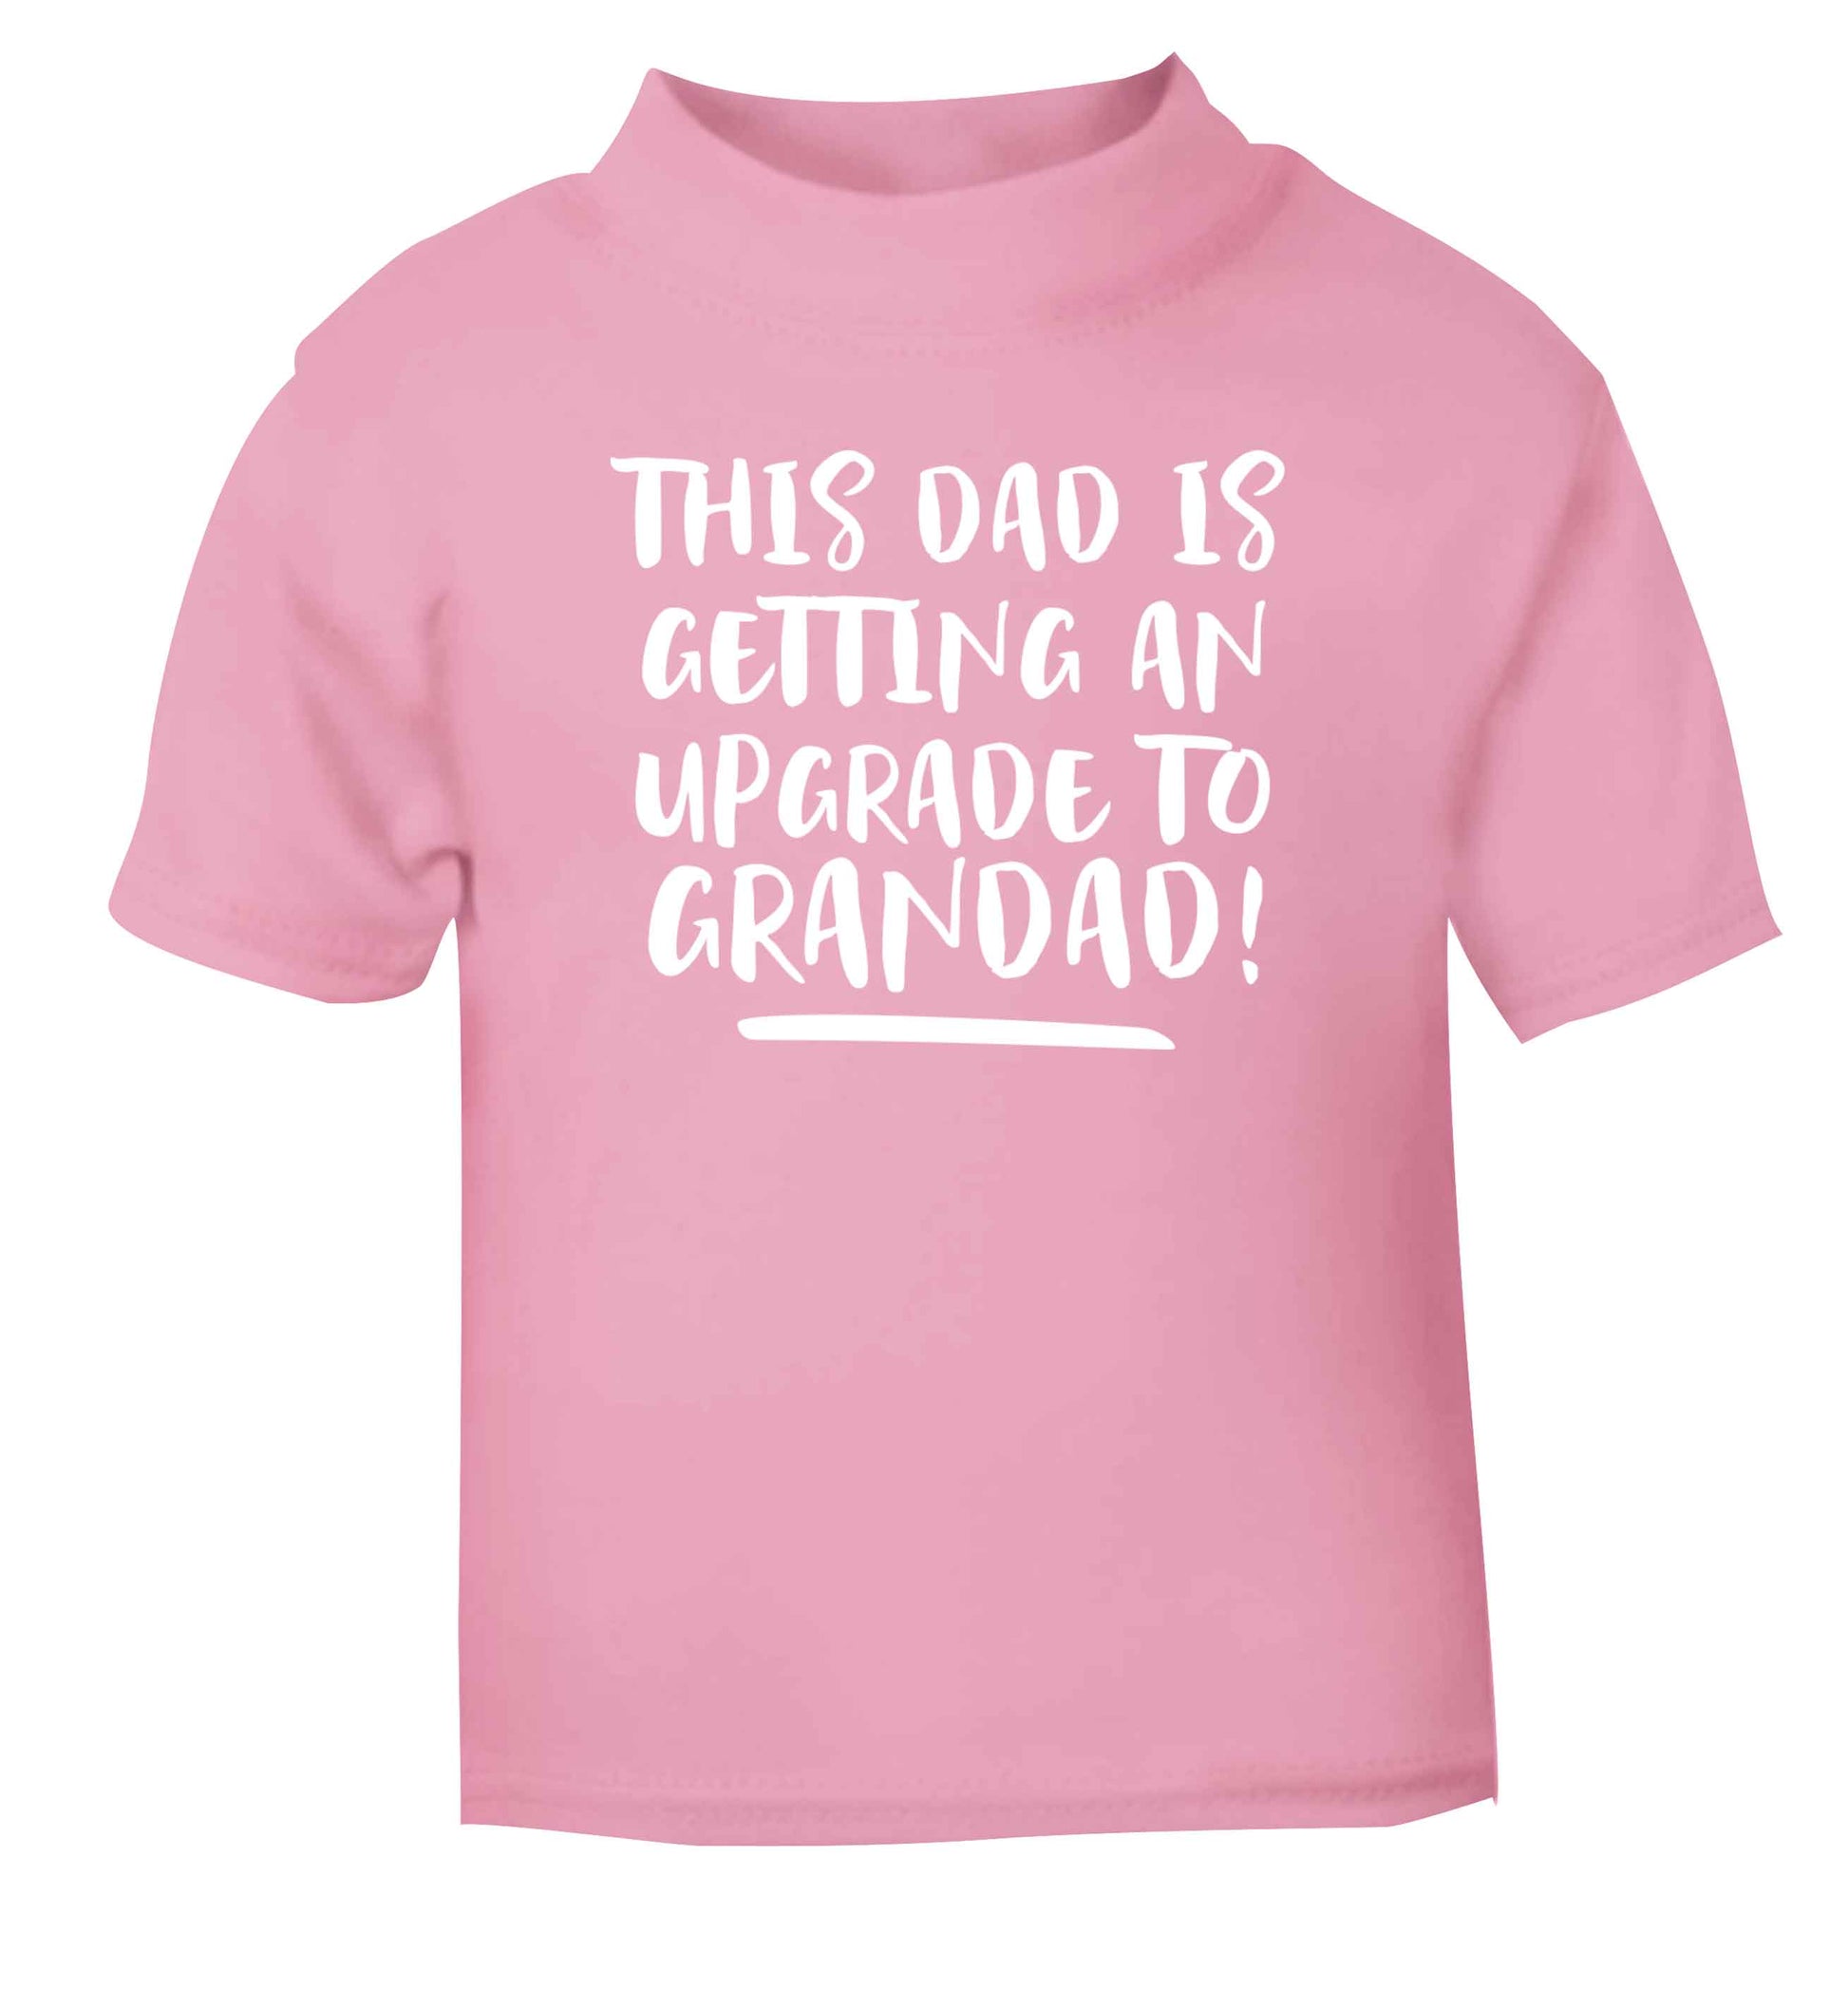 This dad is getting an upgrade to grandad! light pink Baby Toddler Tshirt 2 Years